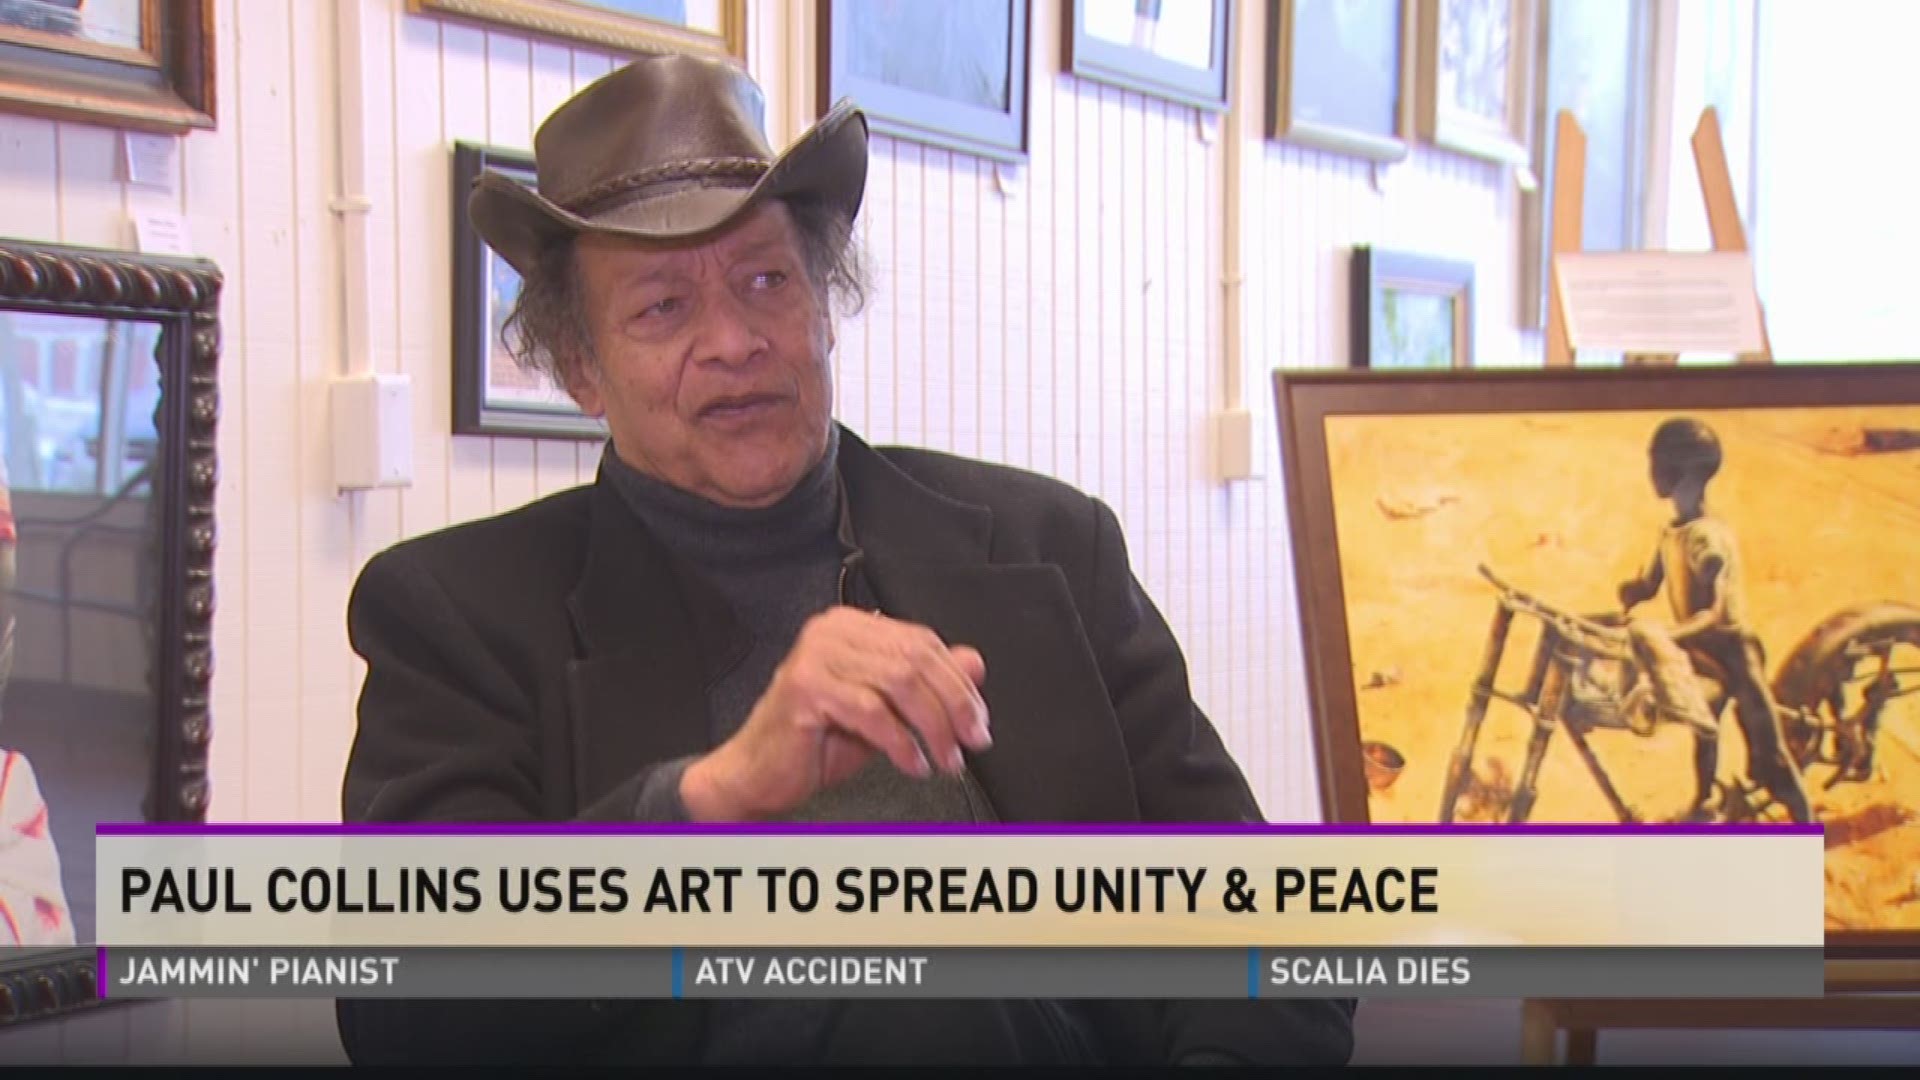 Paul Collins uses art to spread unity & peace